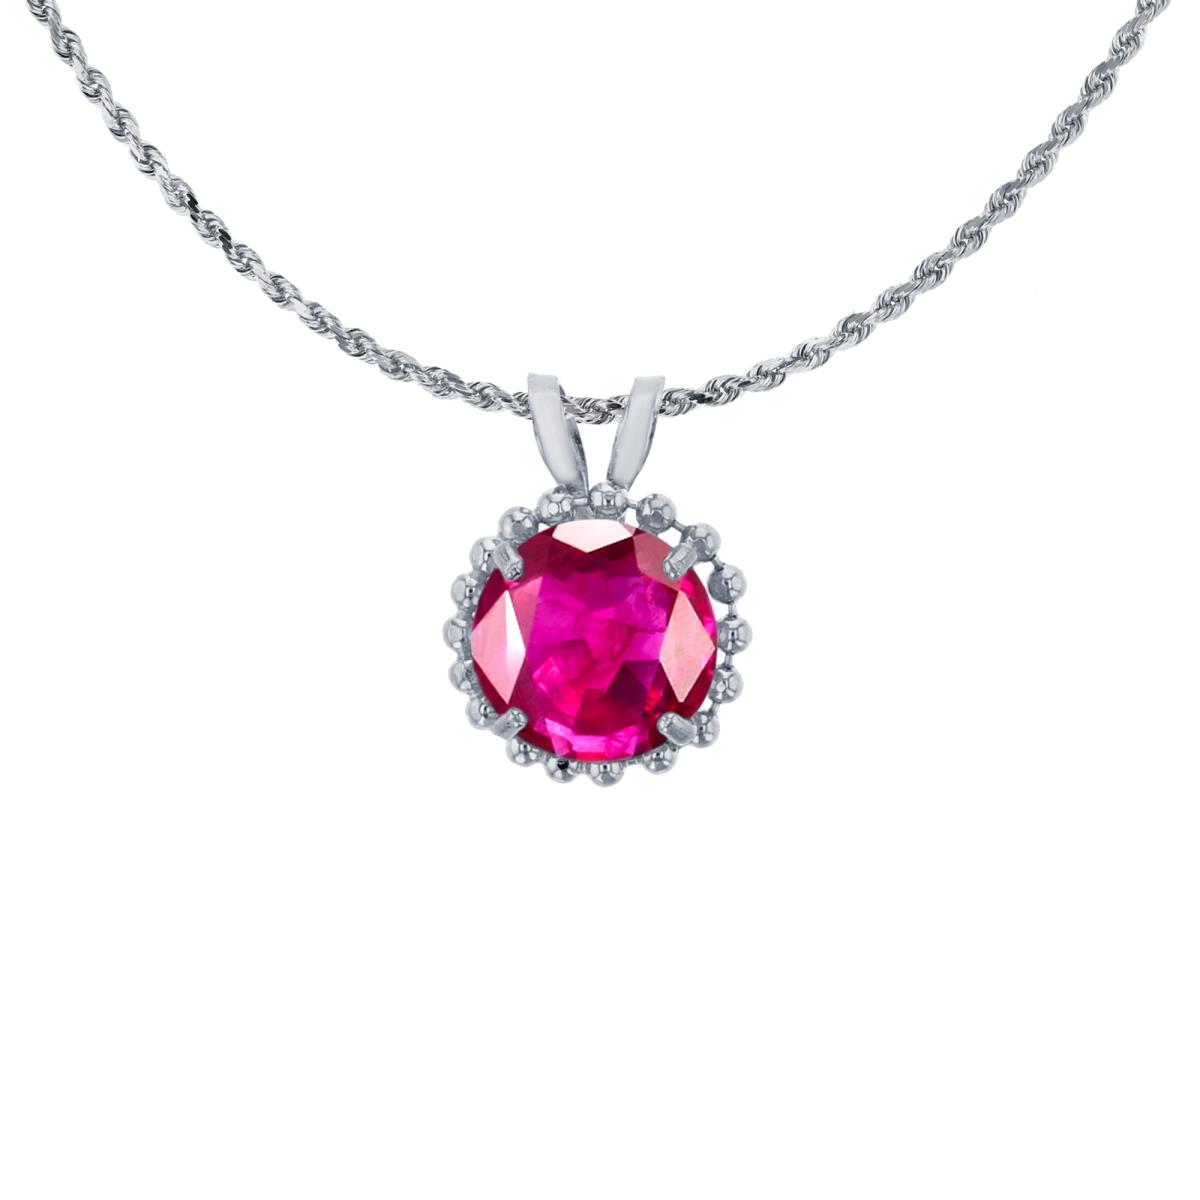 10K White Gold 6mm Rd Cut Created Ruby with Bead Frame Rabbit Ear 18" Necklace